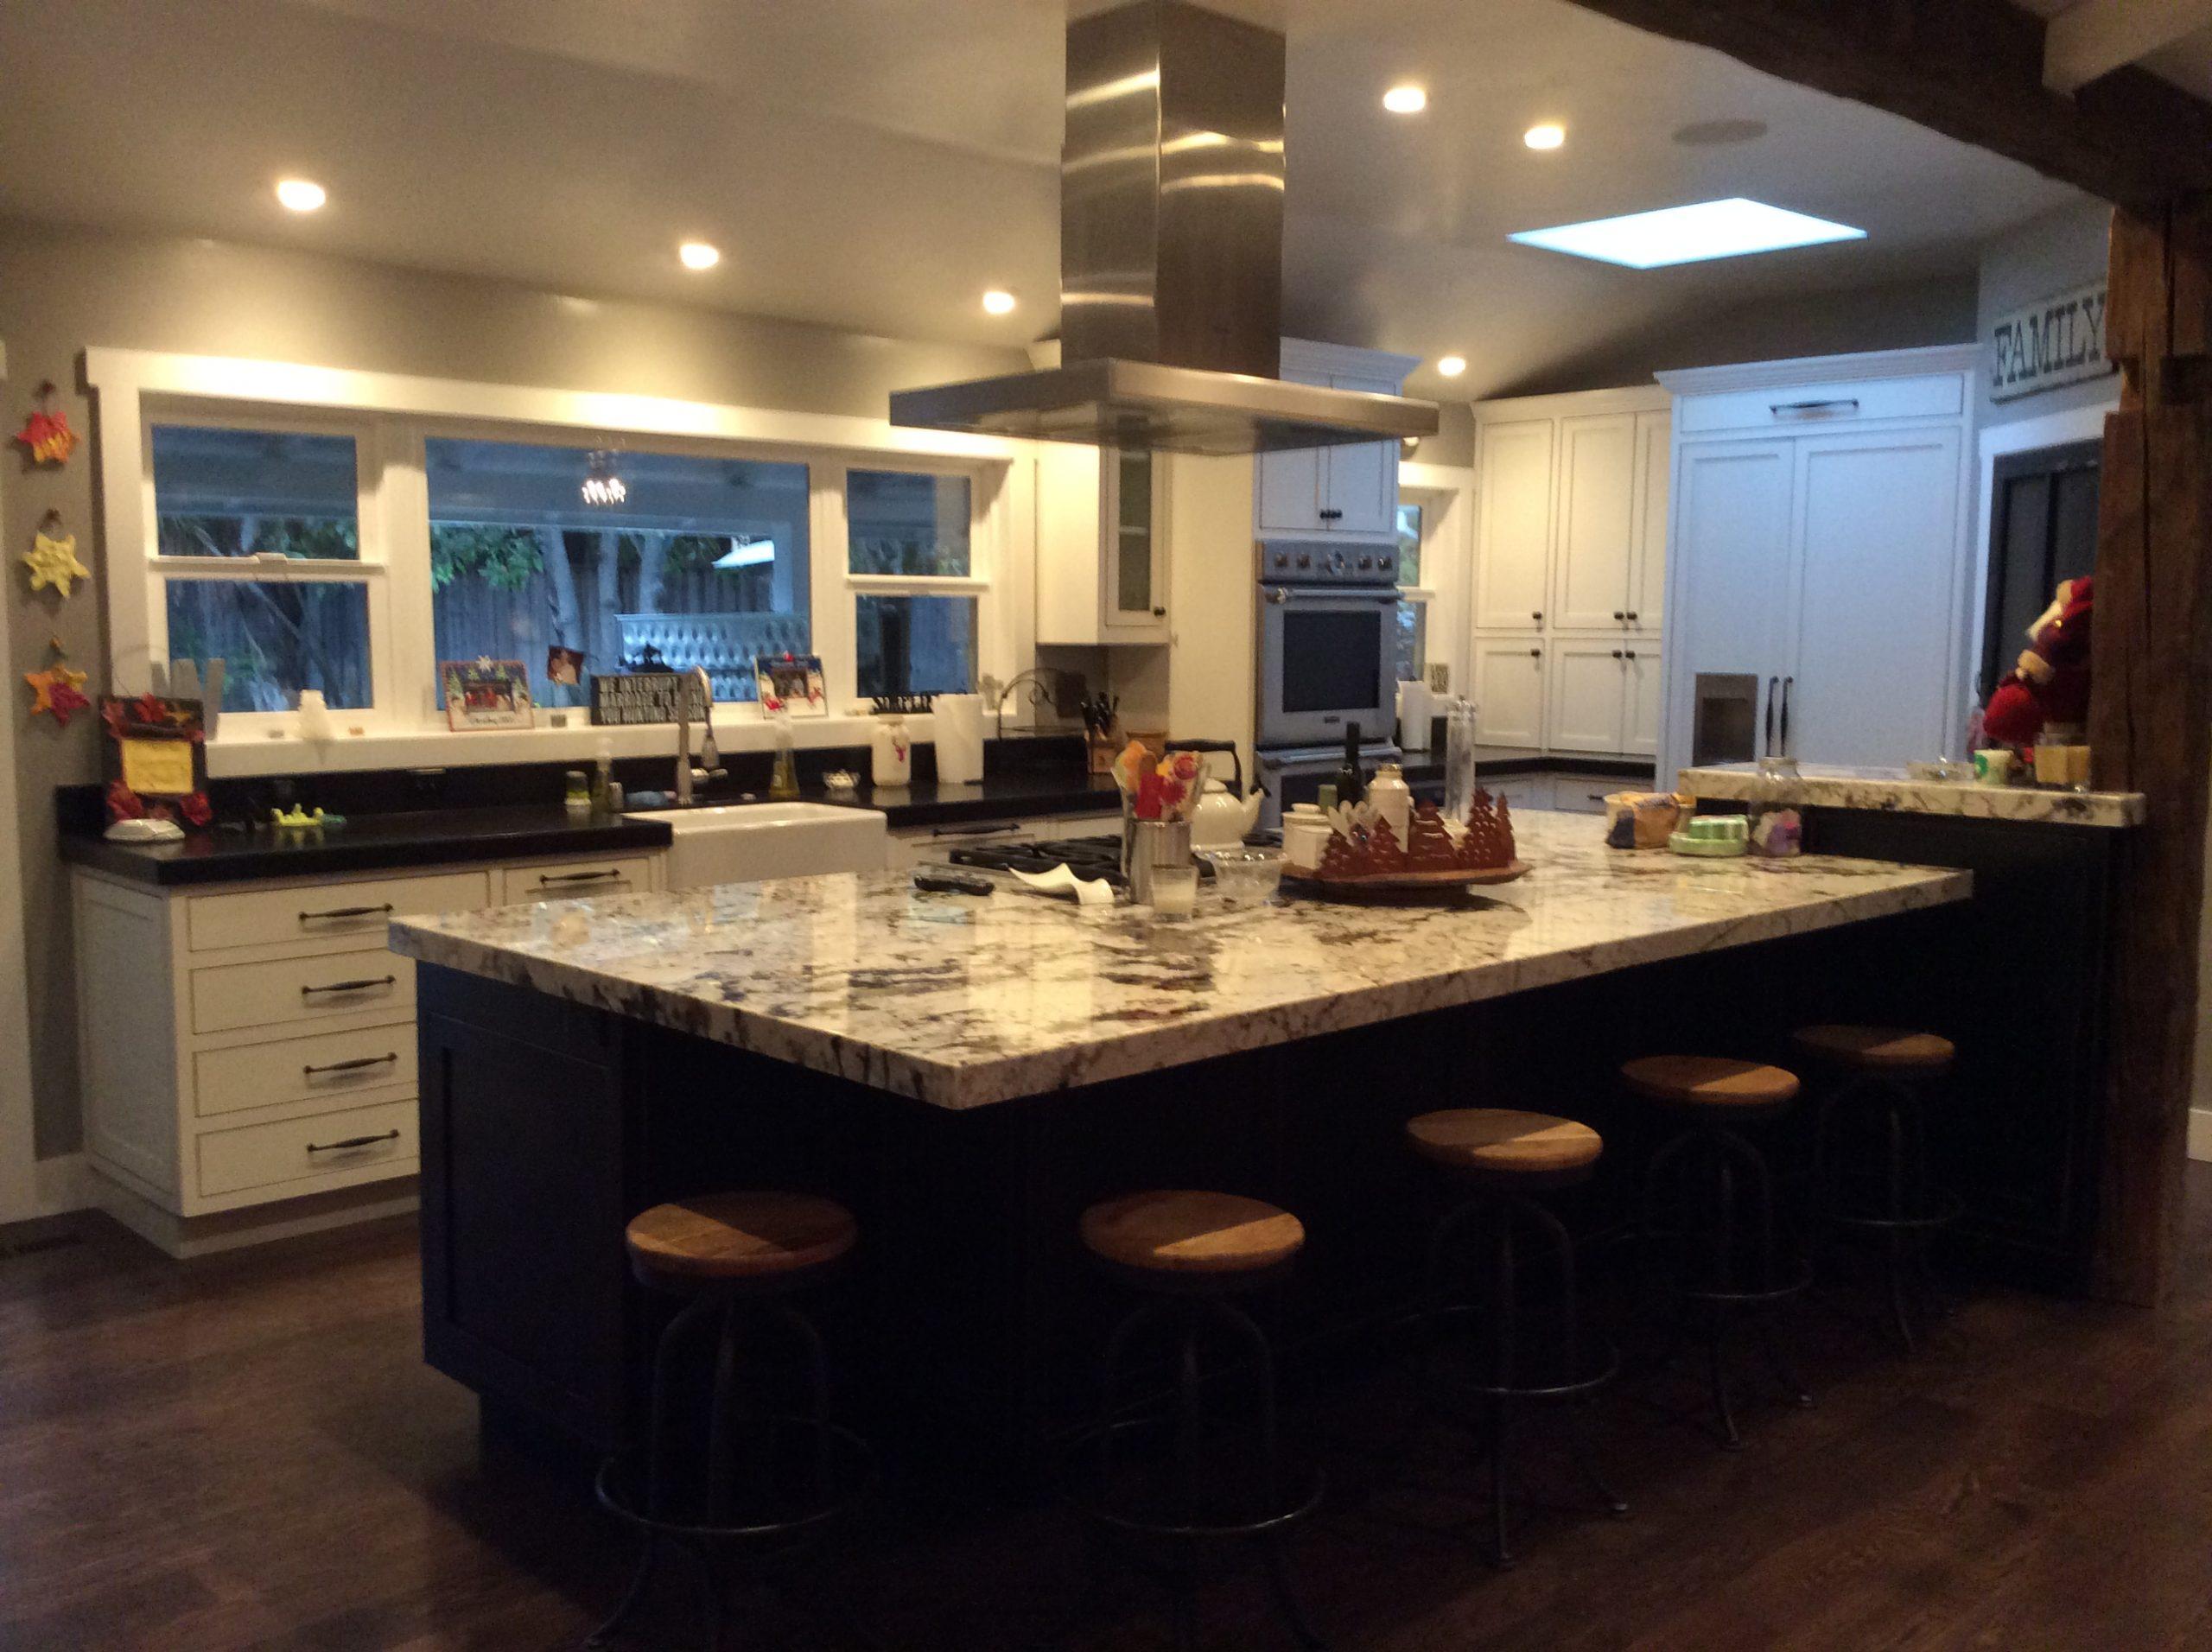 Picture of A Ramos Construction remodeled this kitchen. - A Ramos Construction, Inc.